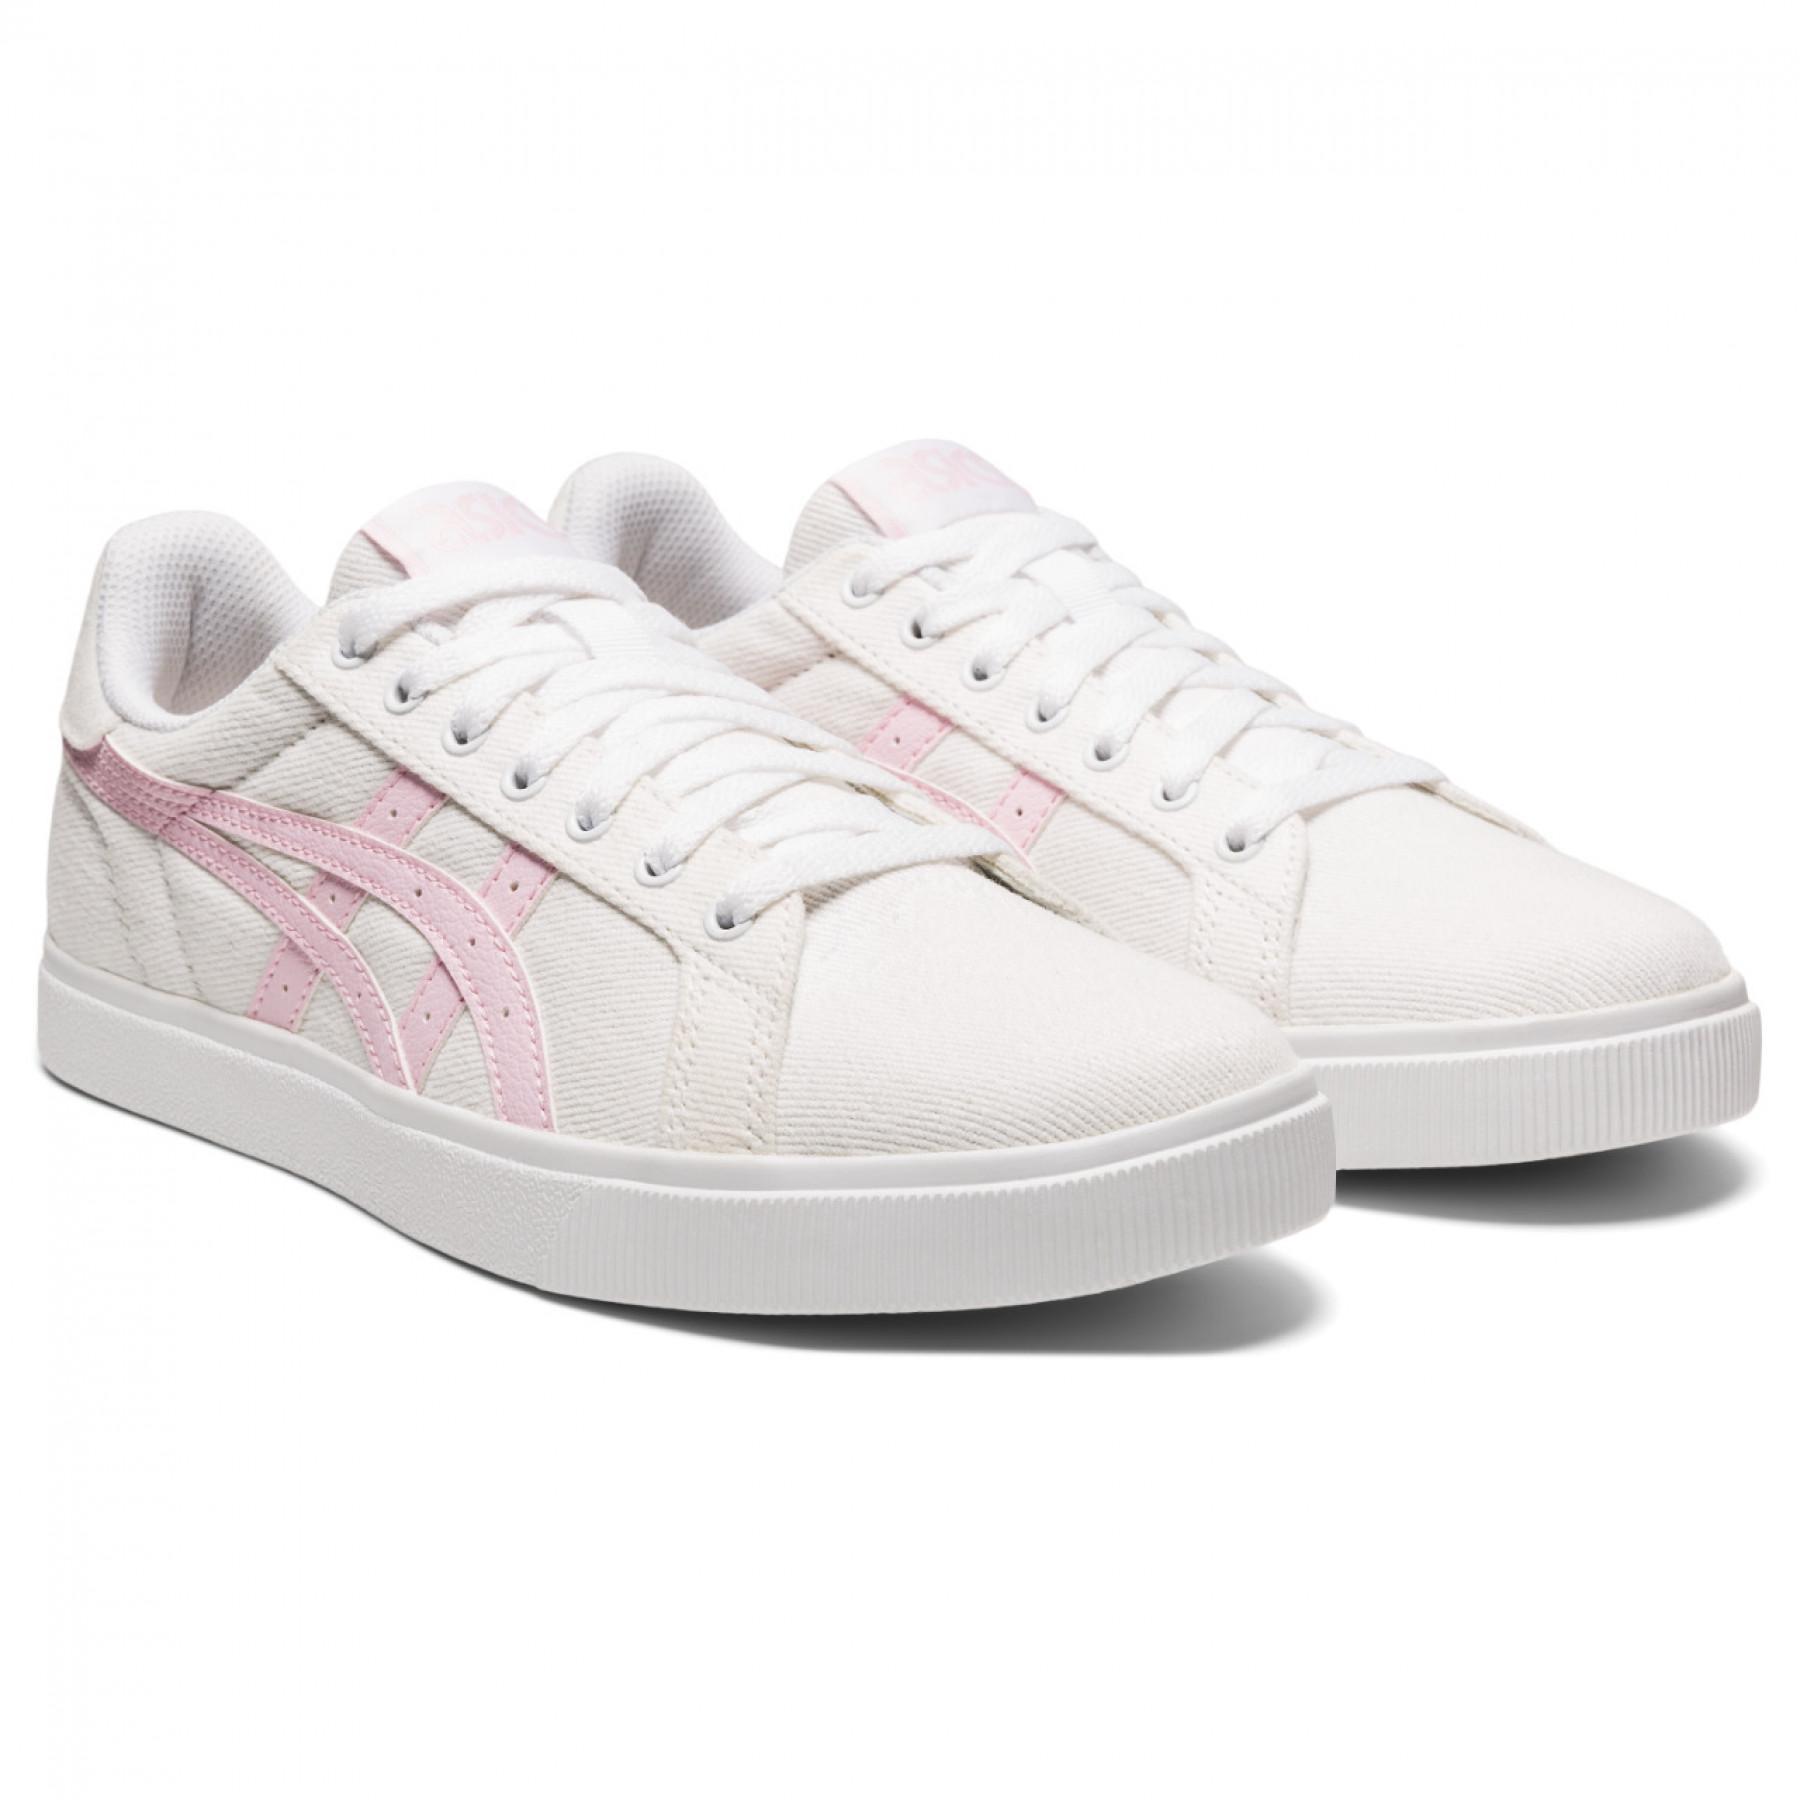 Sneakers woman Asics Classic Ct